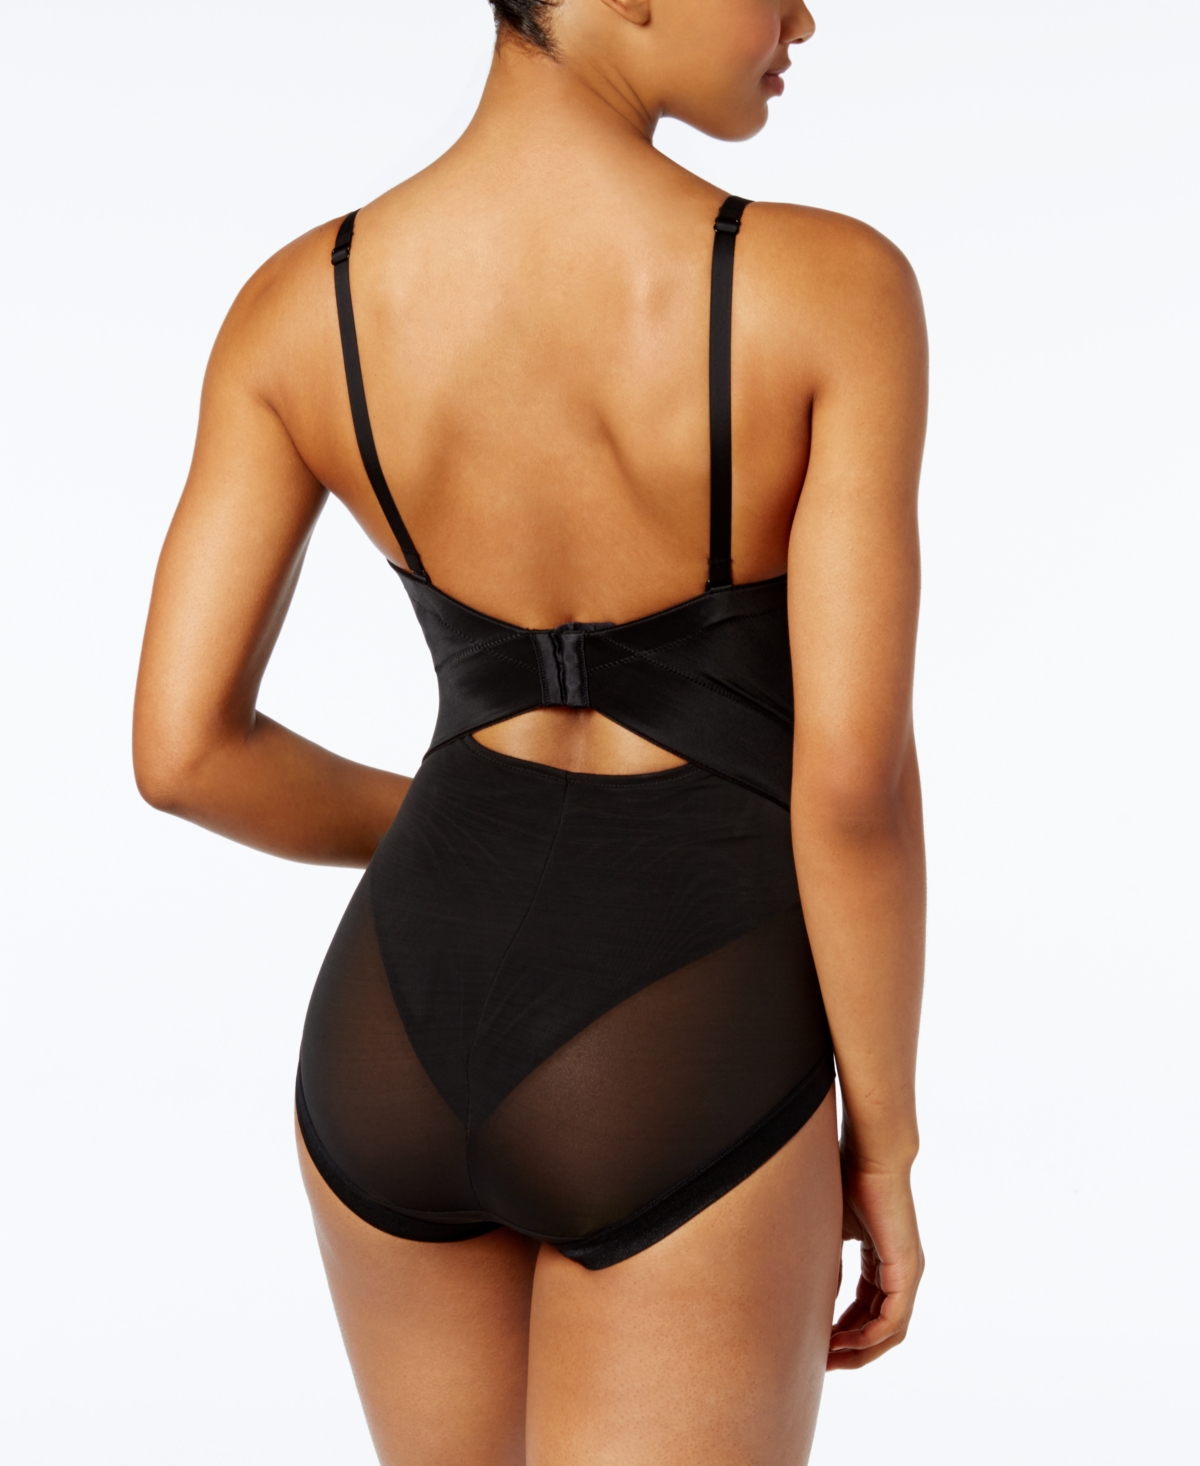 Maidenform Wirefree Demi DM7155 a Macy's exclusive style